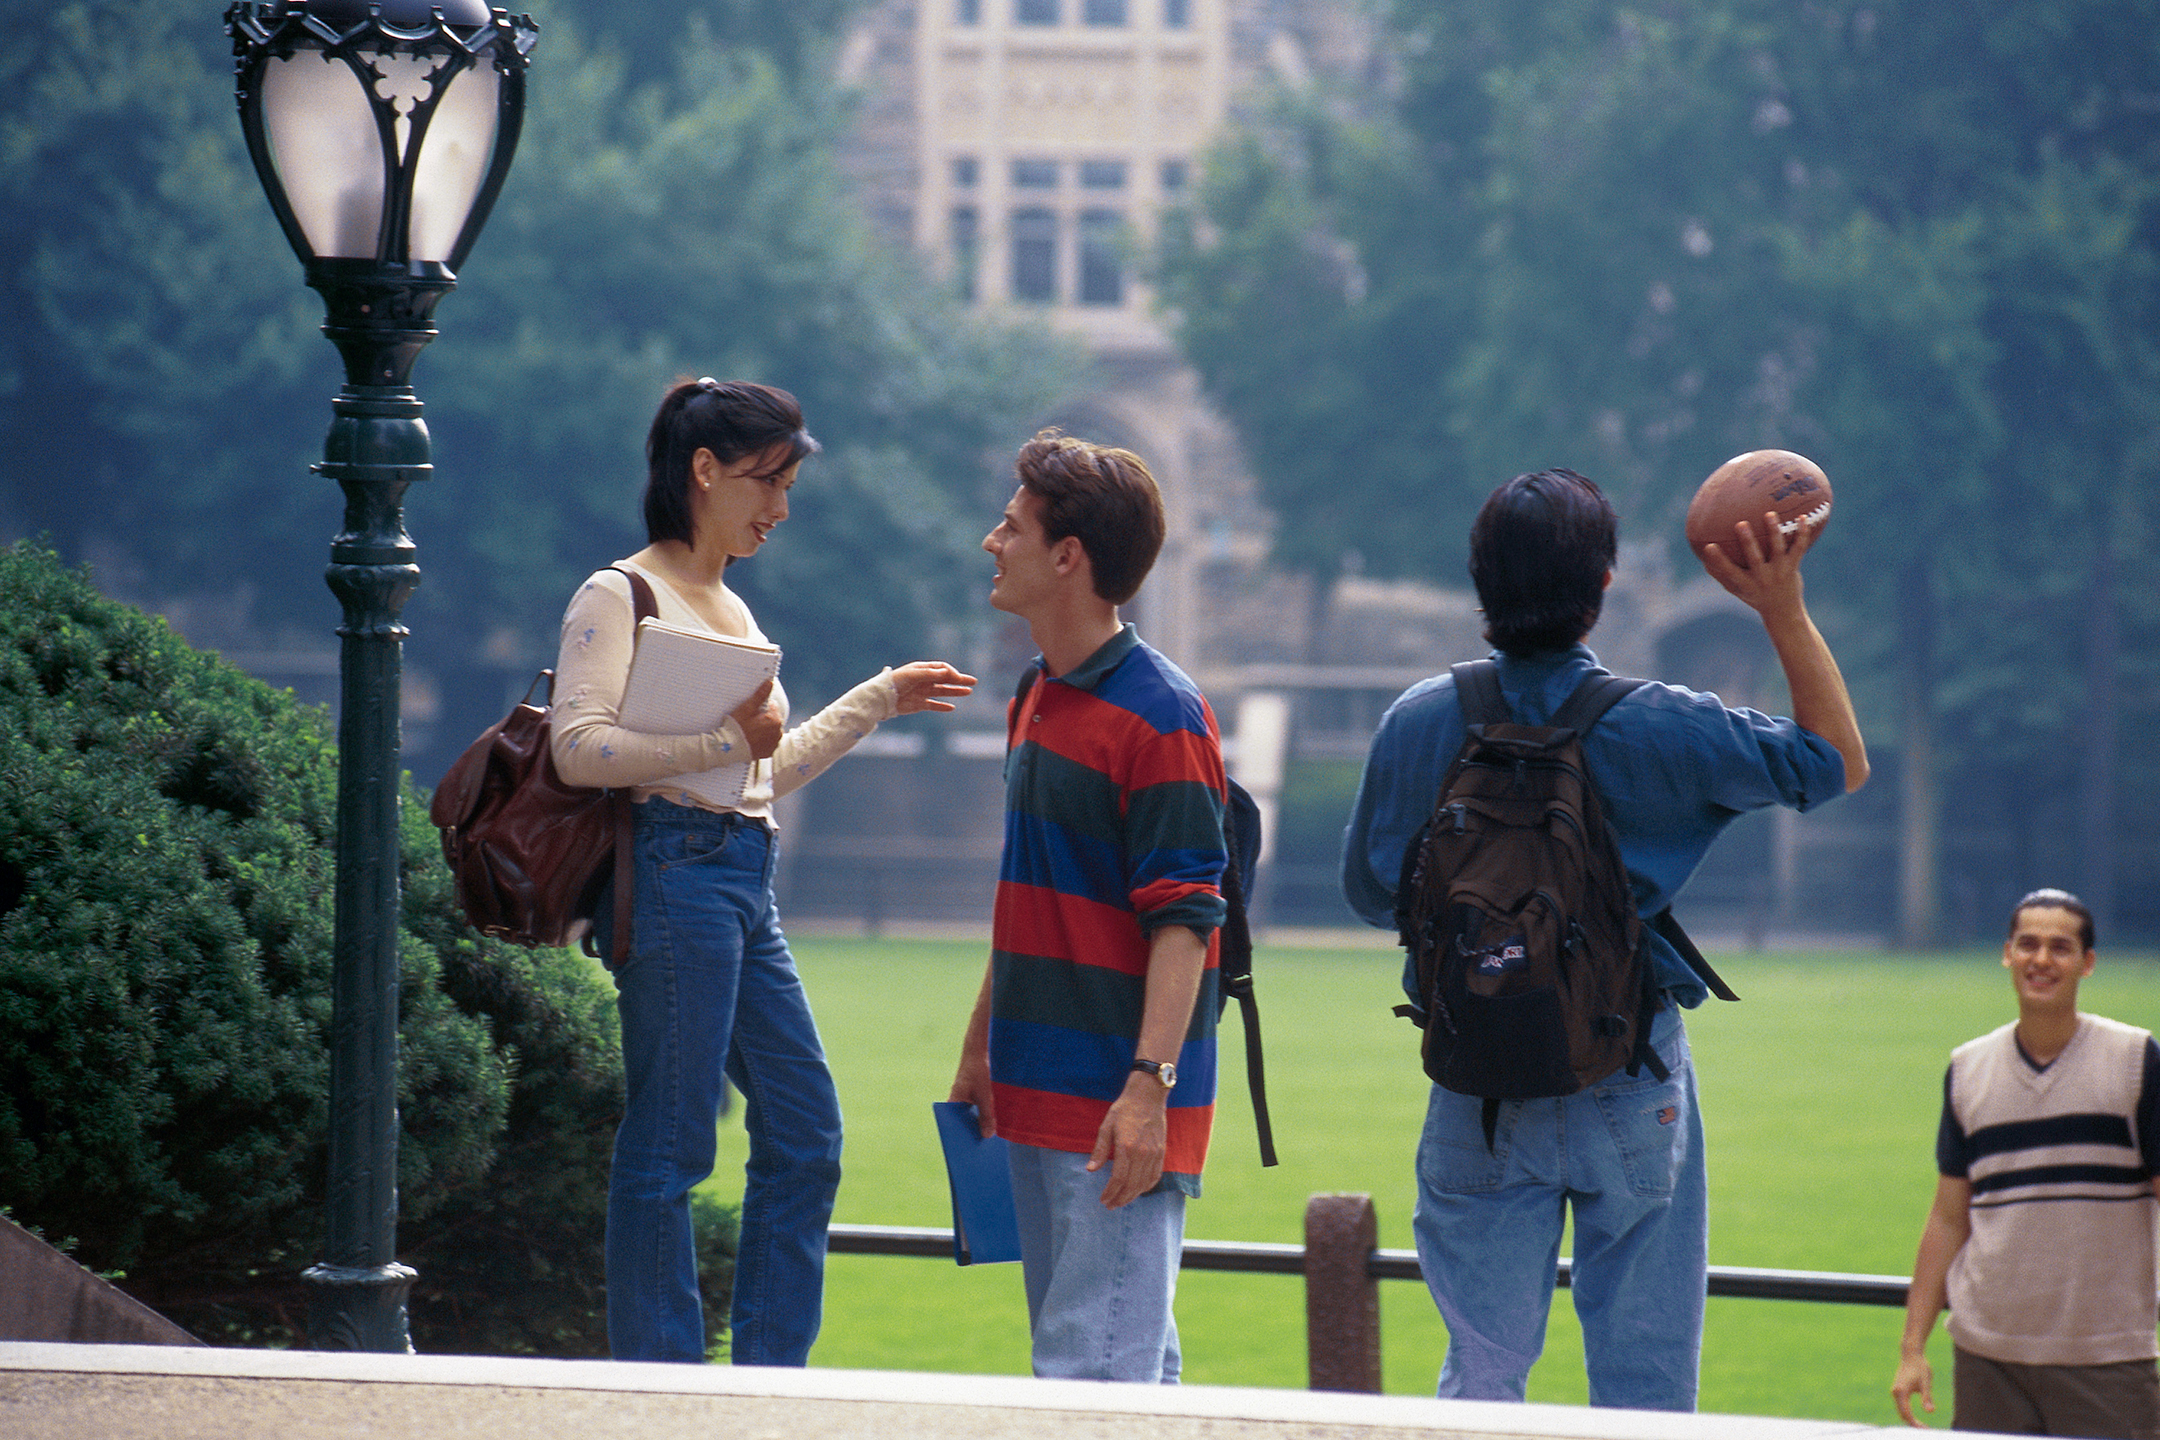 Four college students on a campus, two talking to each other, the other two tossing a football